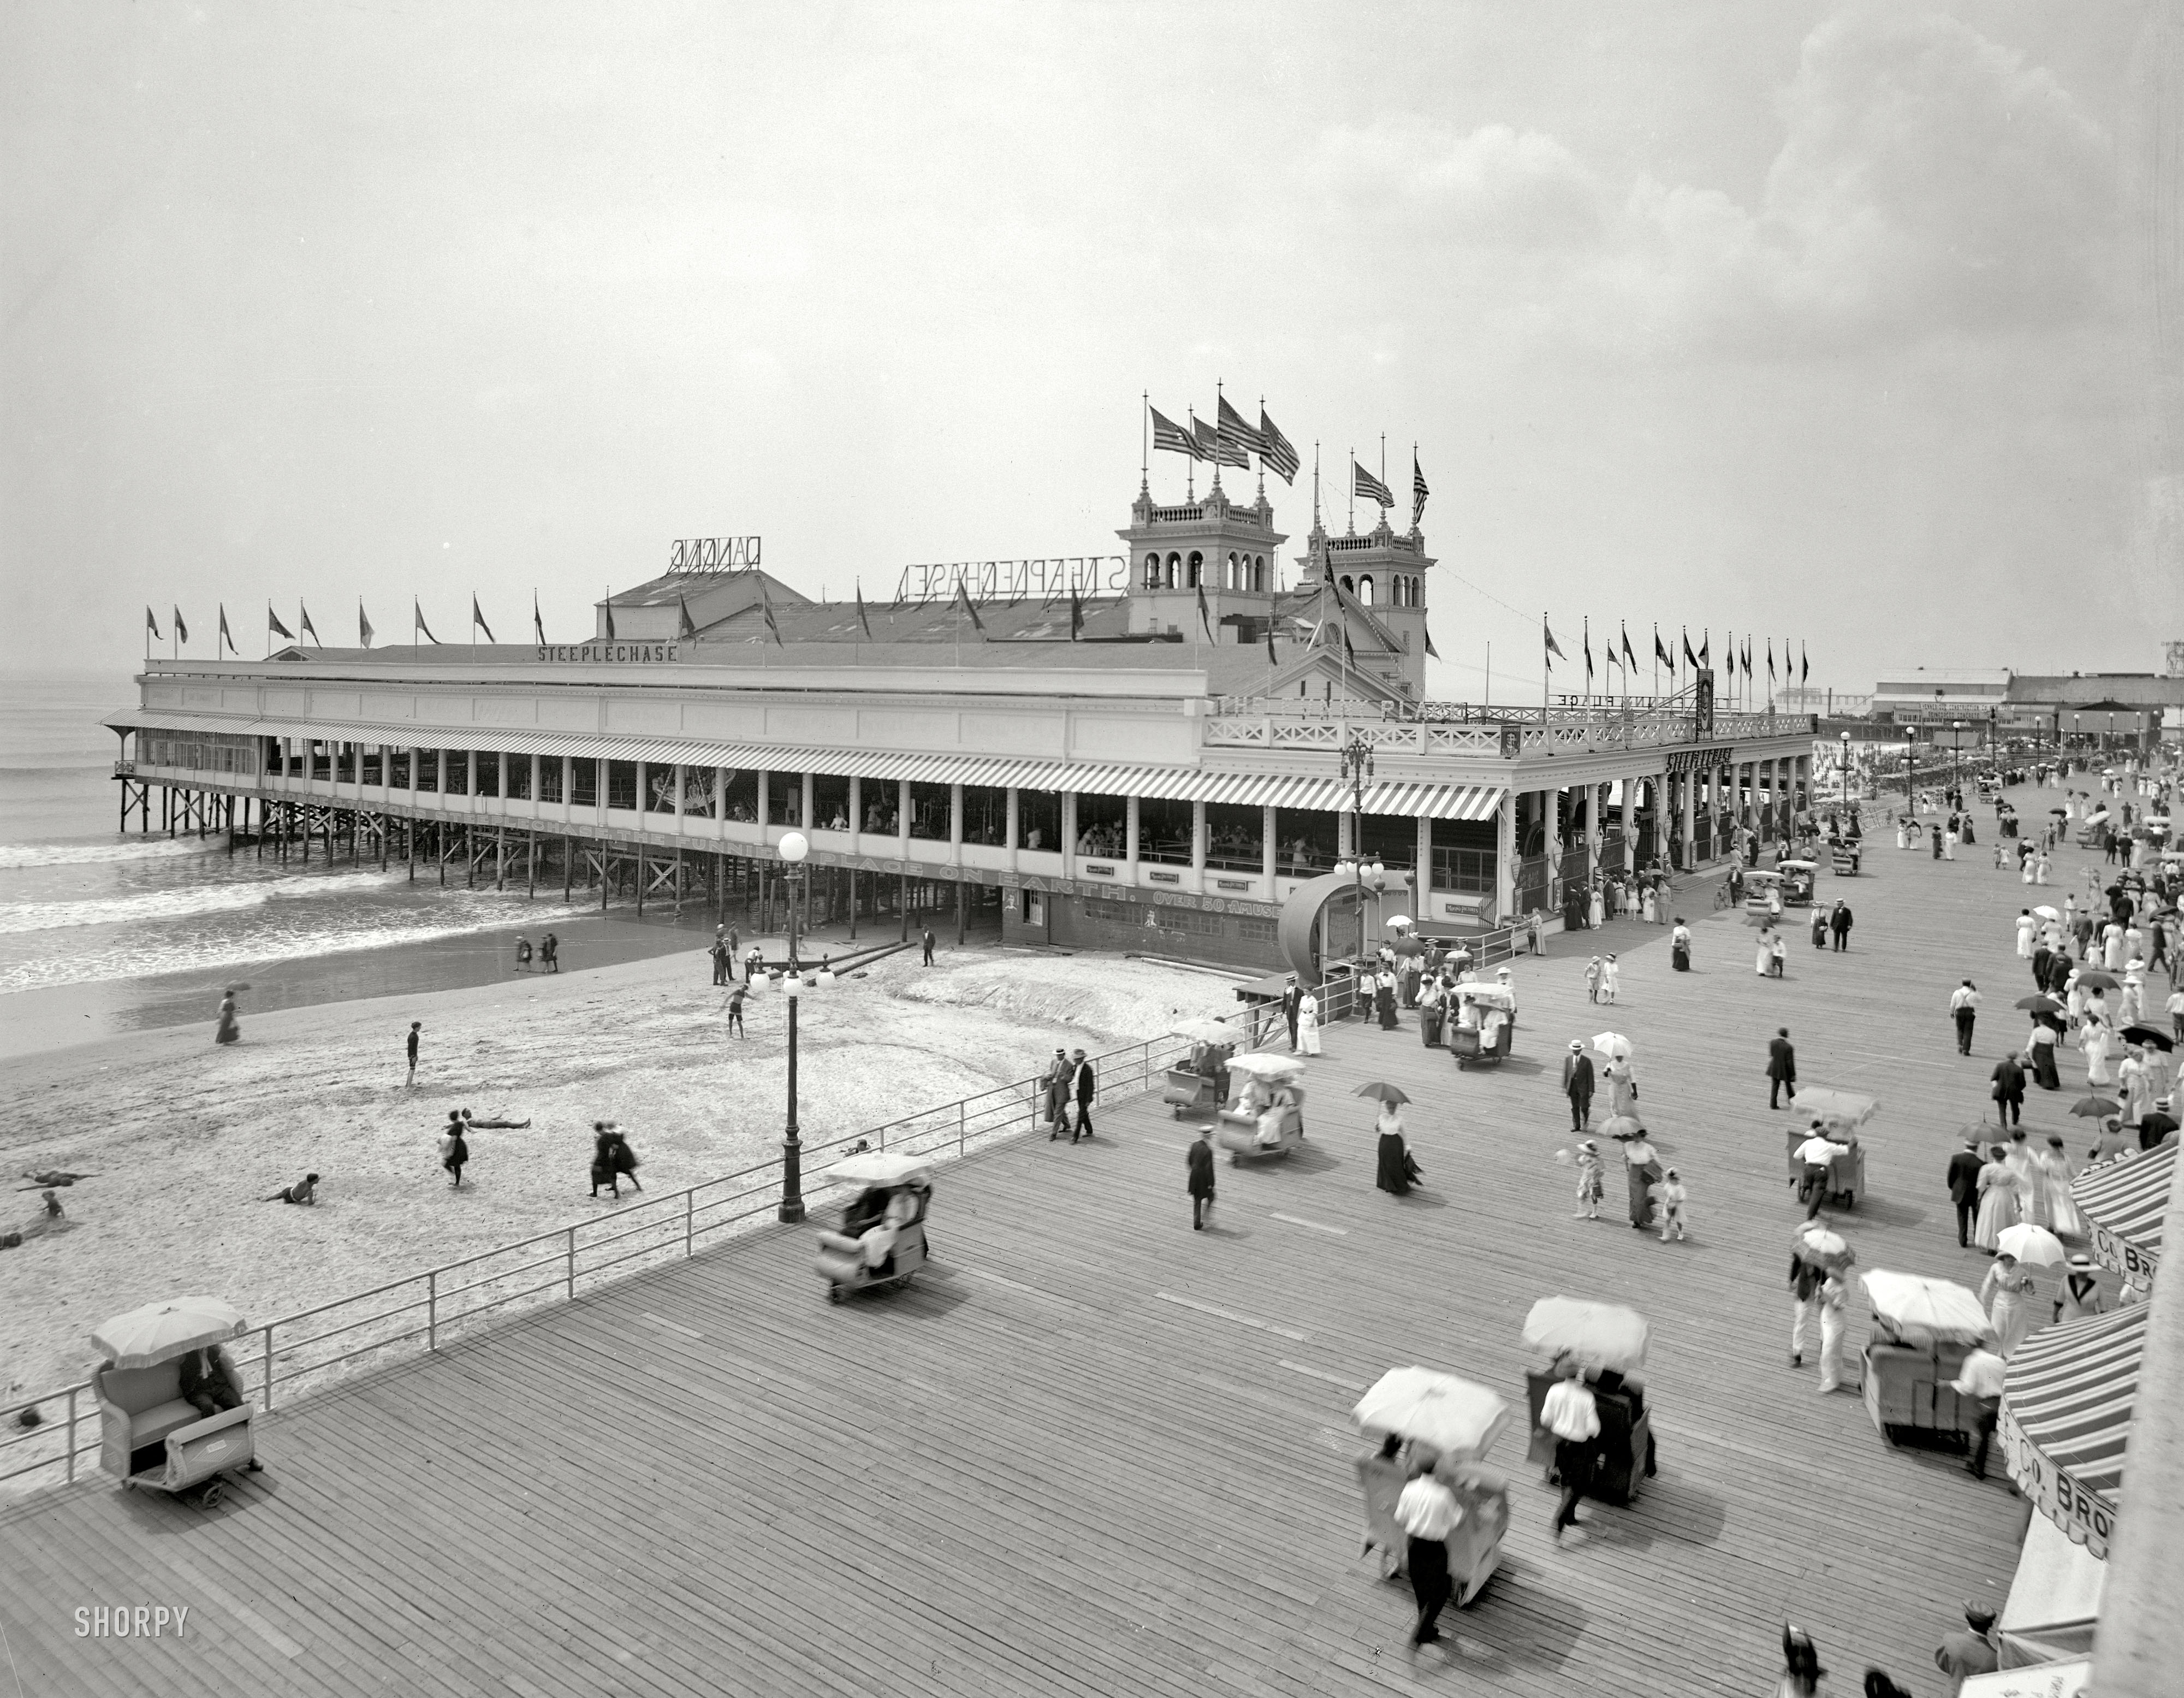 The Jersey Shore circa 1910. "Steeplechase Pier and Boardwalk, Atlantic City." 8x10 inch dry plate glass negative, Detroit Publishing Company. View full size.